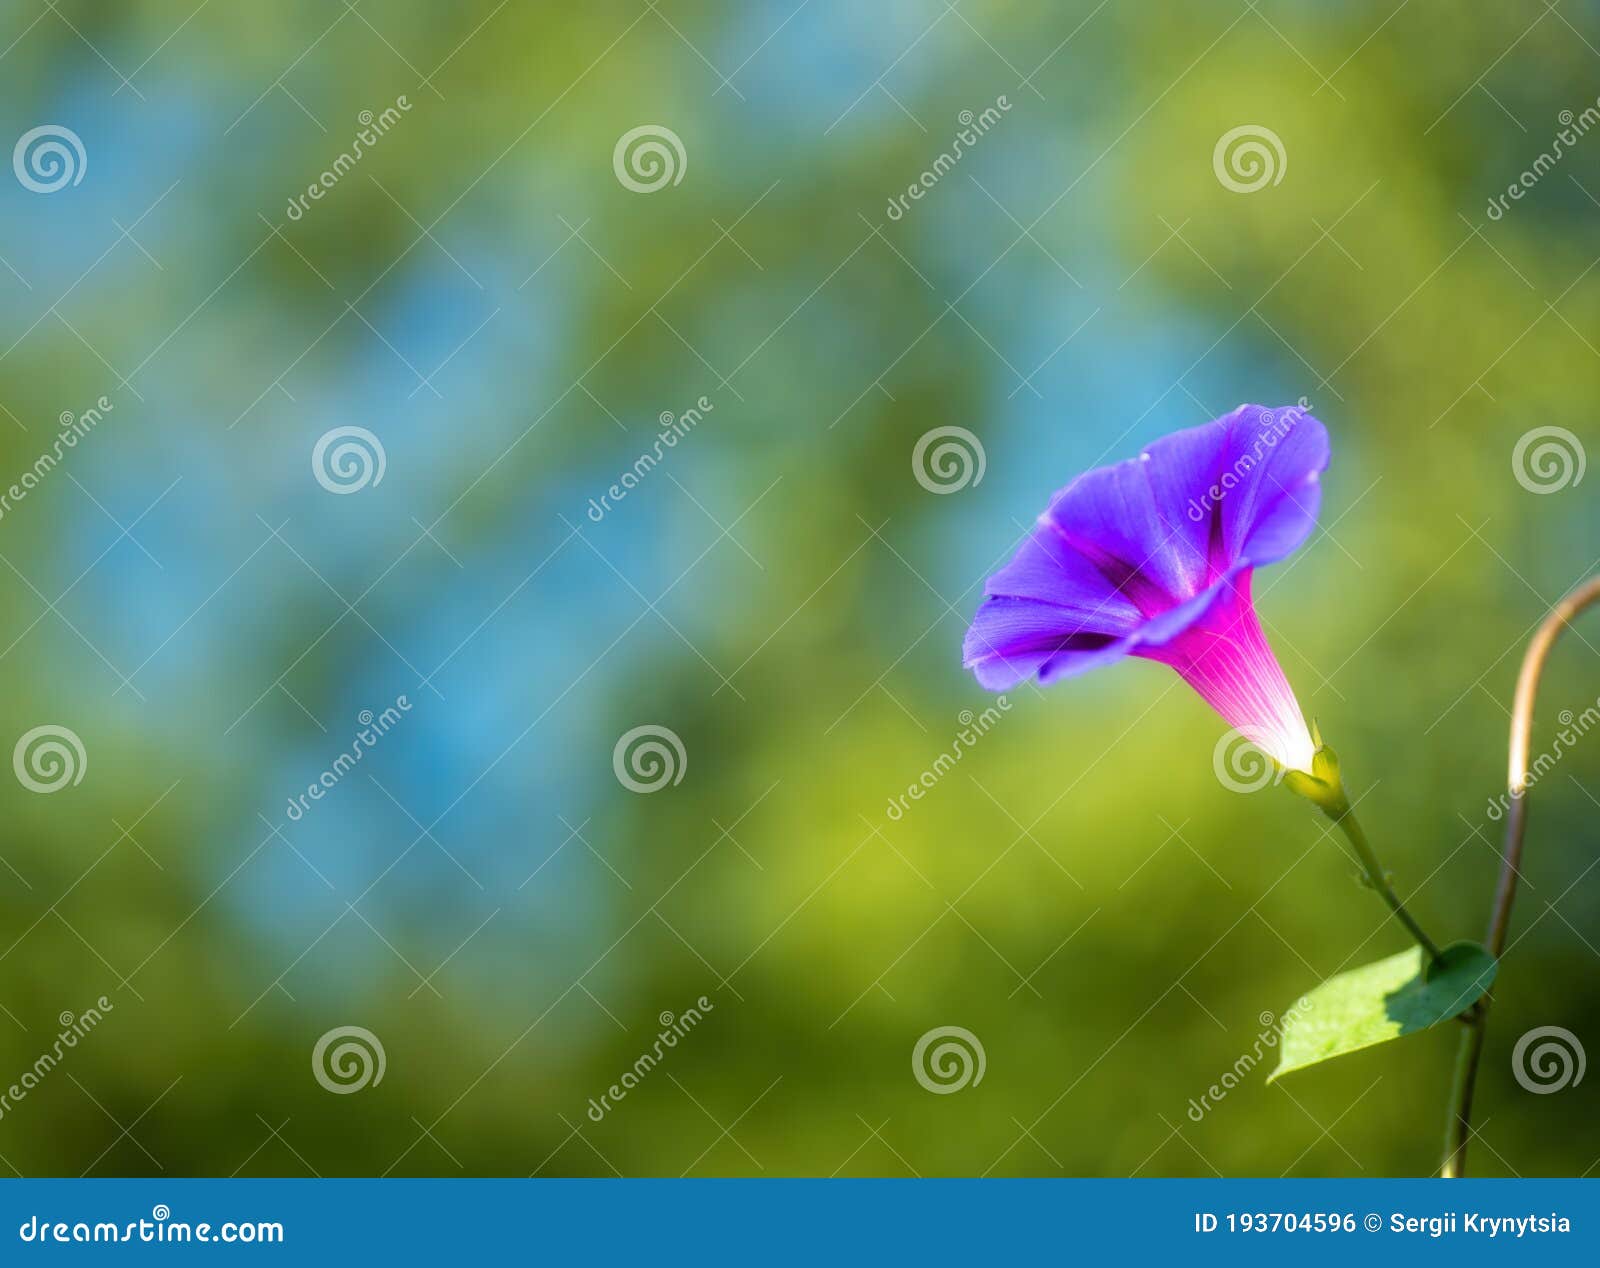 blue and purple morning glory flower backlit by sun on colorful nature bokeh background